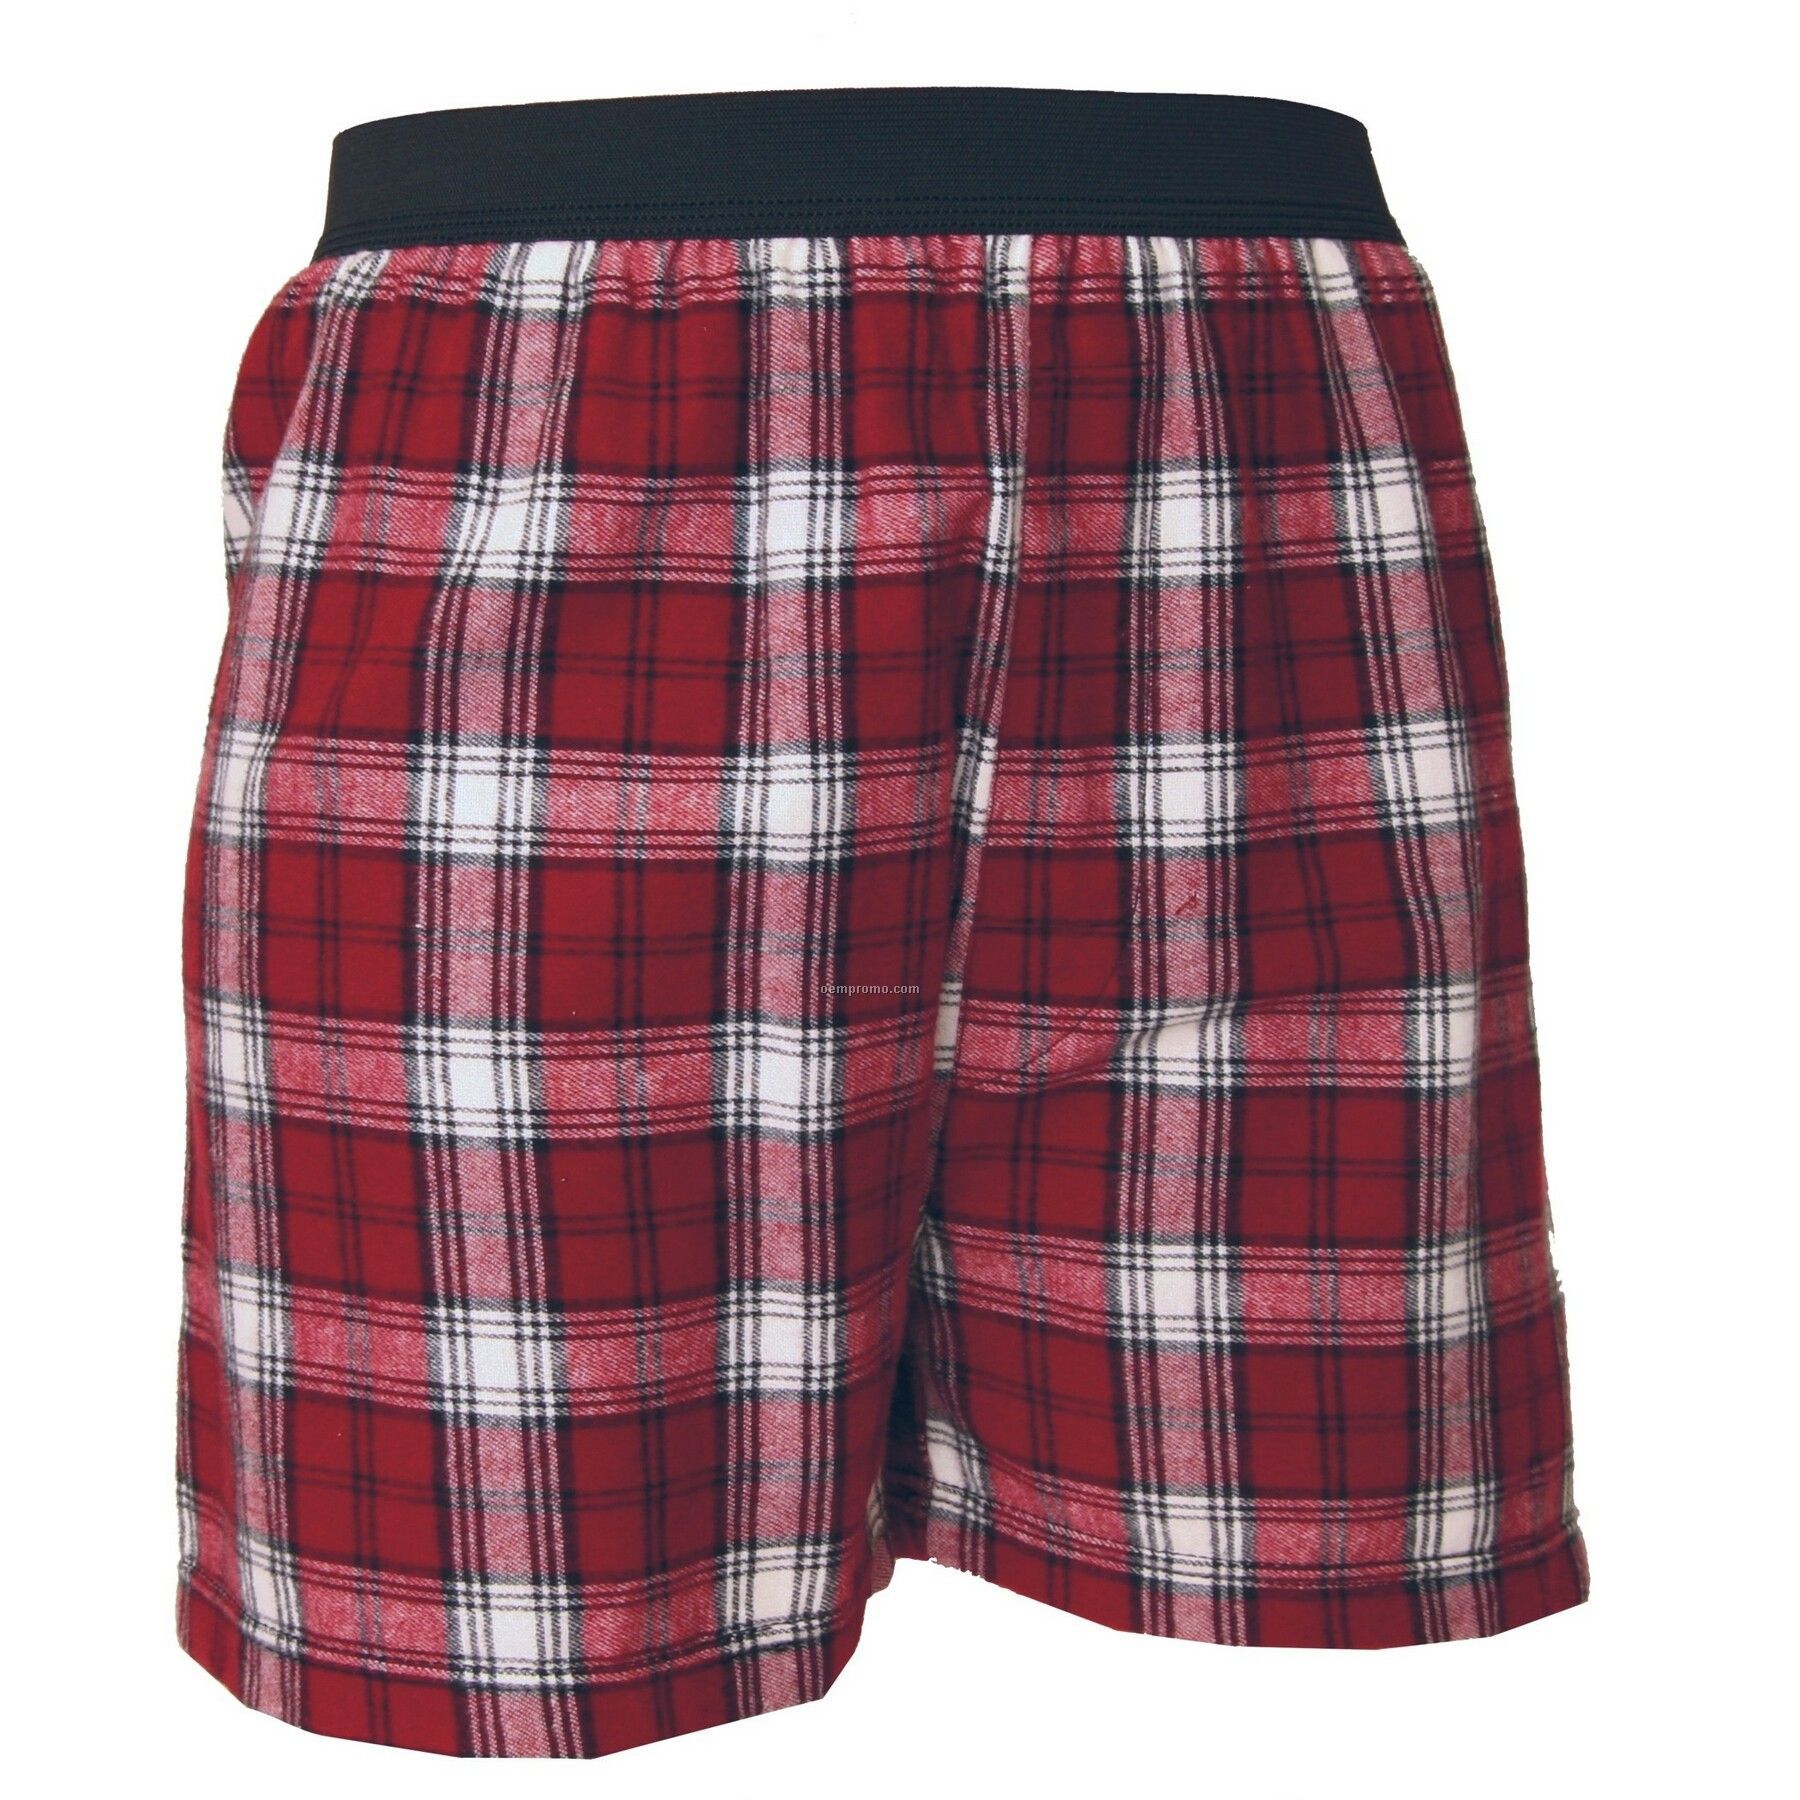 Adult Maroon Red/White Plaid Classic Boxer Short